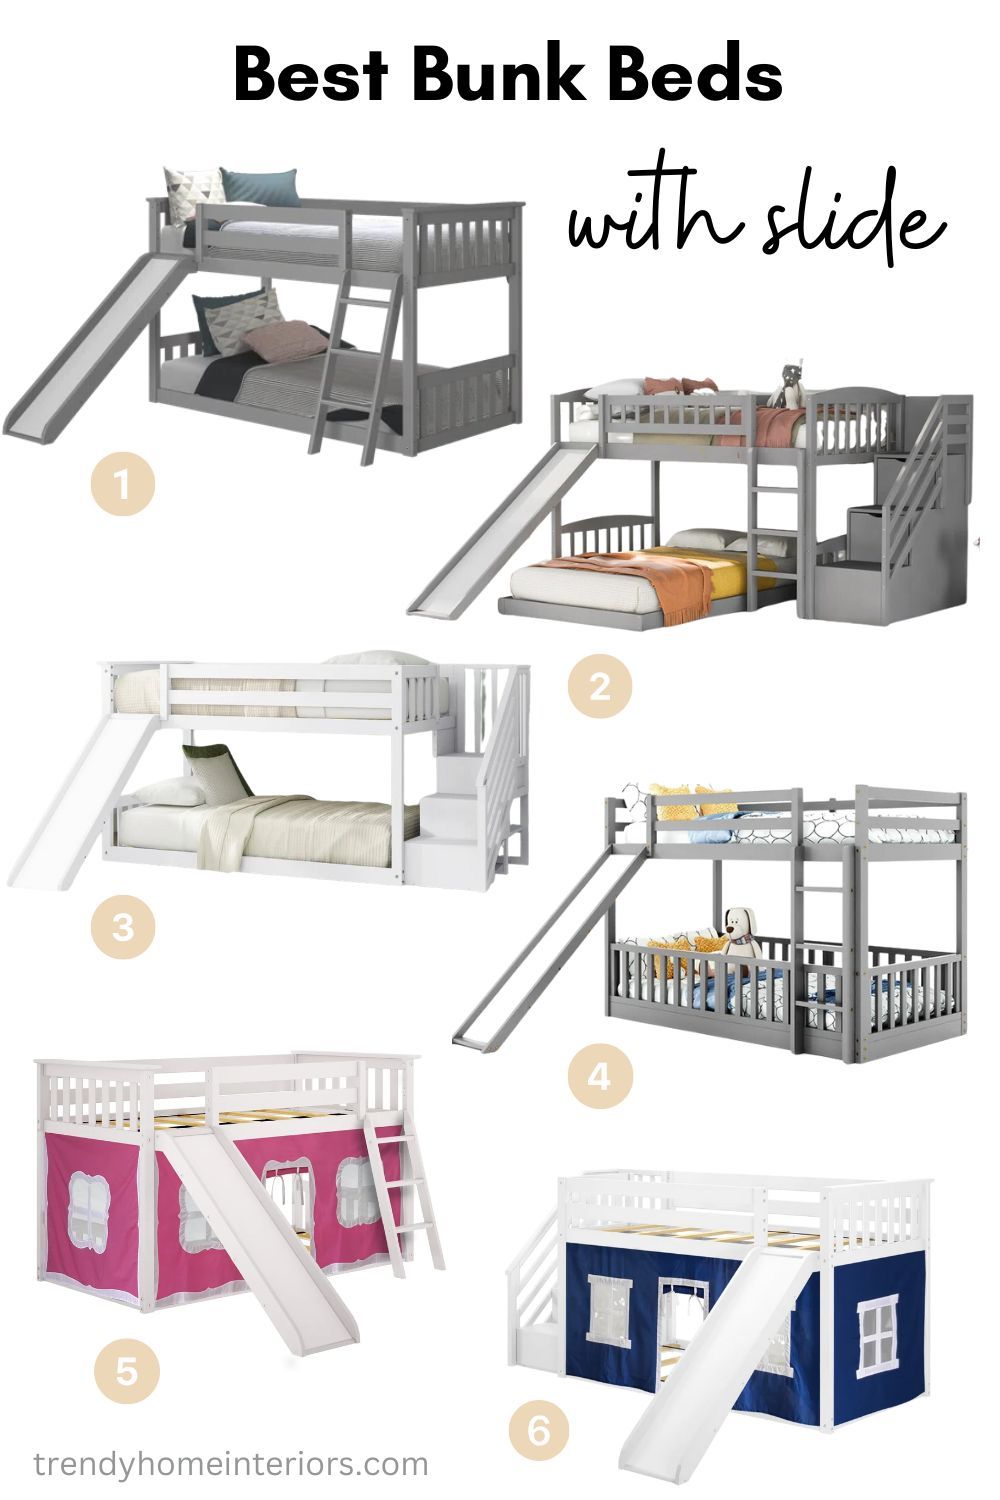 Bunk bed with slide